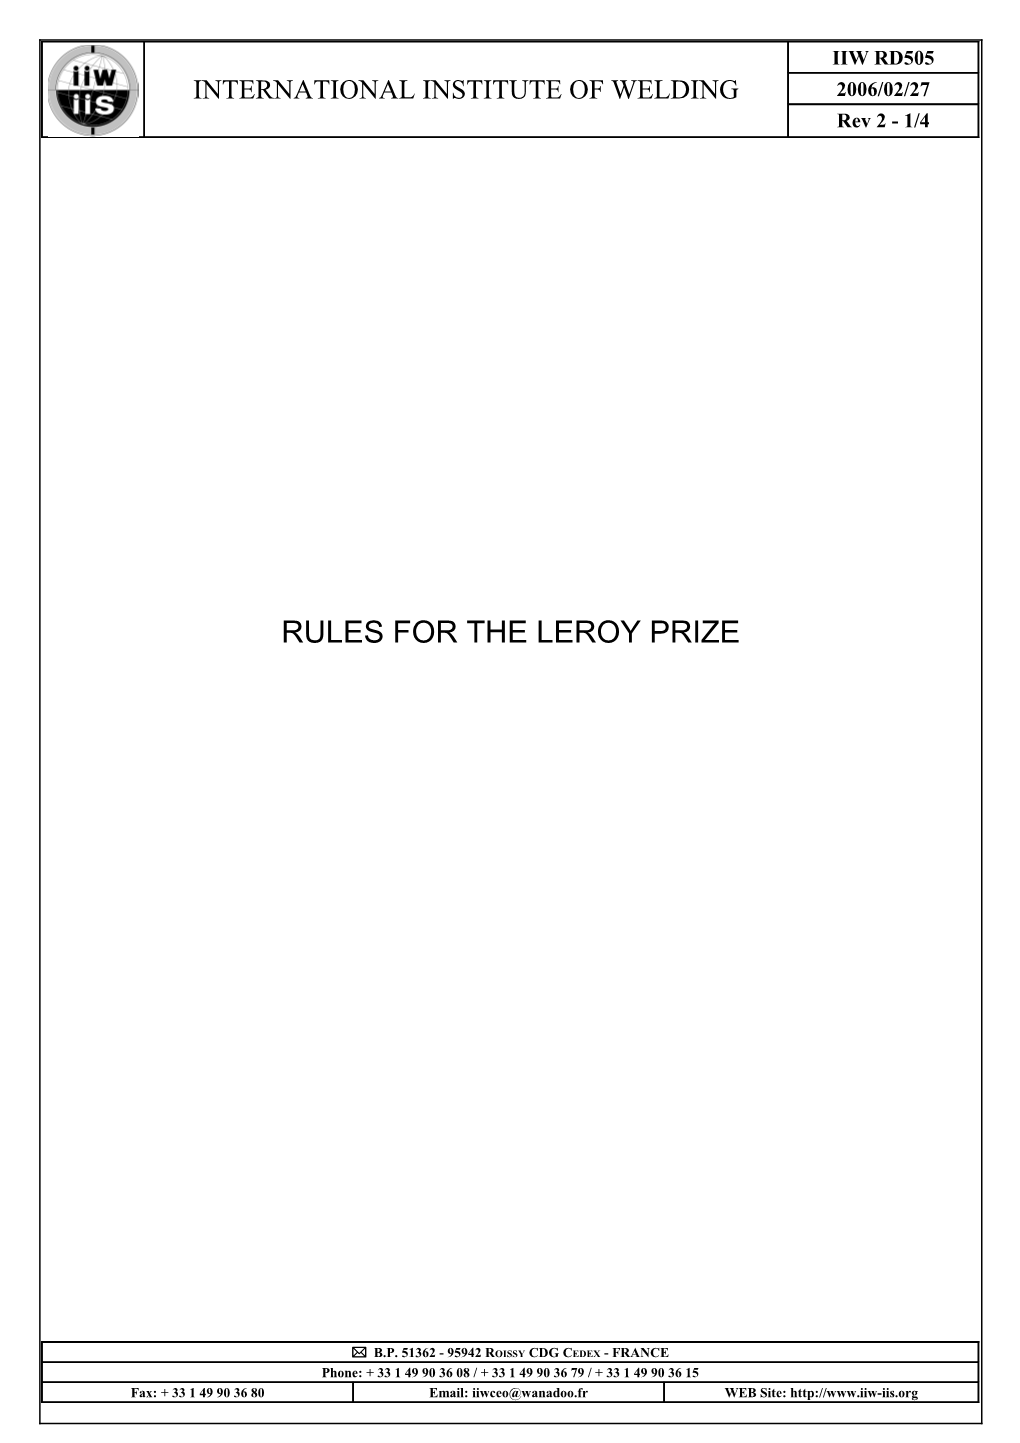 Rules for the Leroy Prize